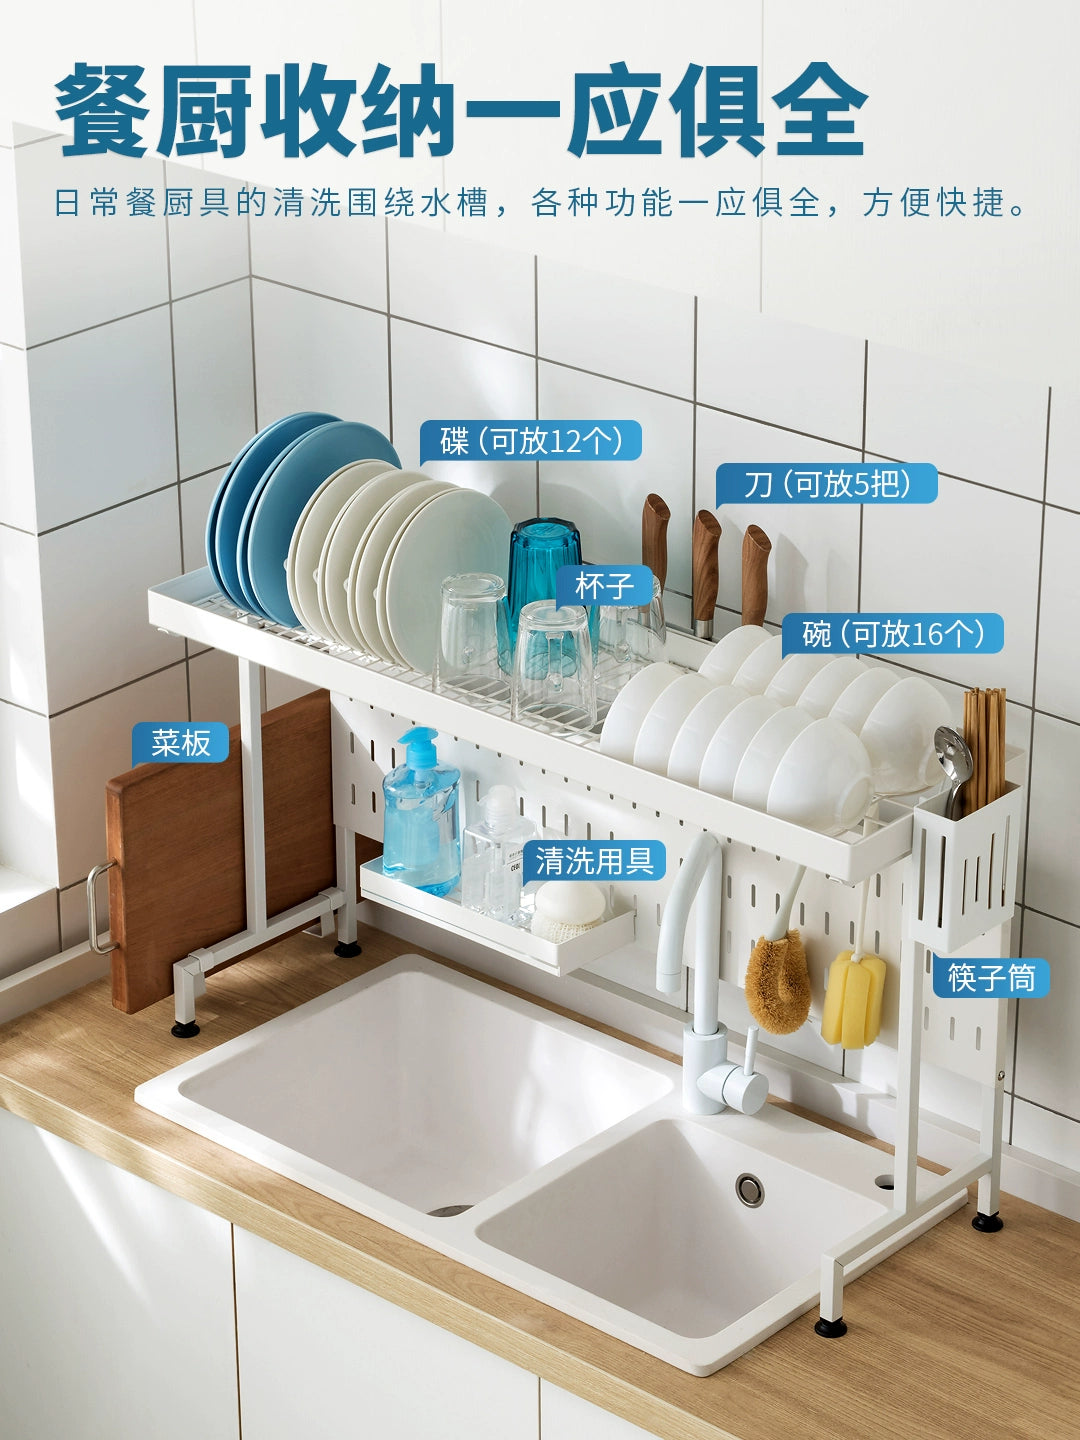 Retractable Kitchen Sink Storage Shelf Countertop Place Bowls and Dishes Chopsticks Multi-Functional Domestic Sink Top Draining Storage Rack